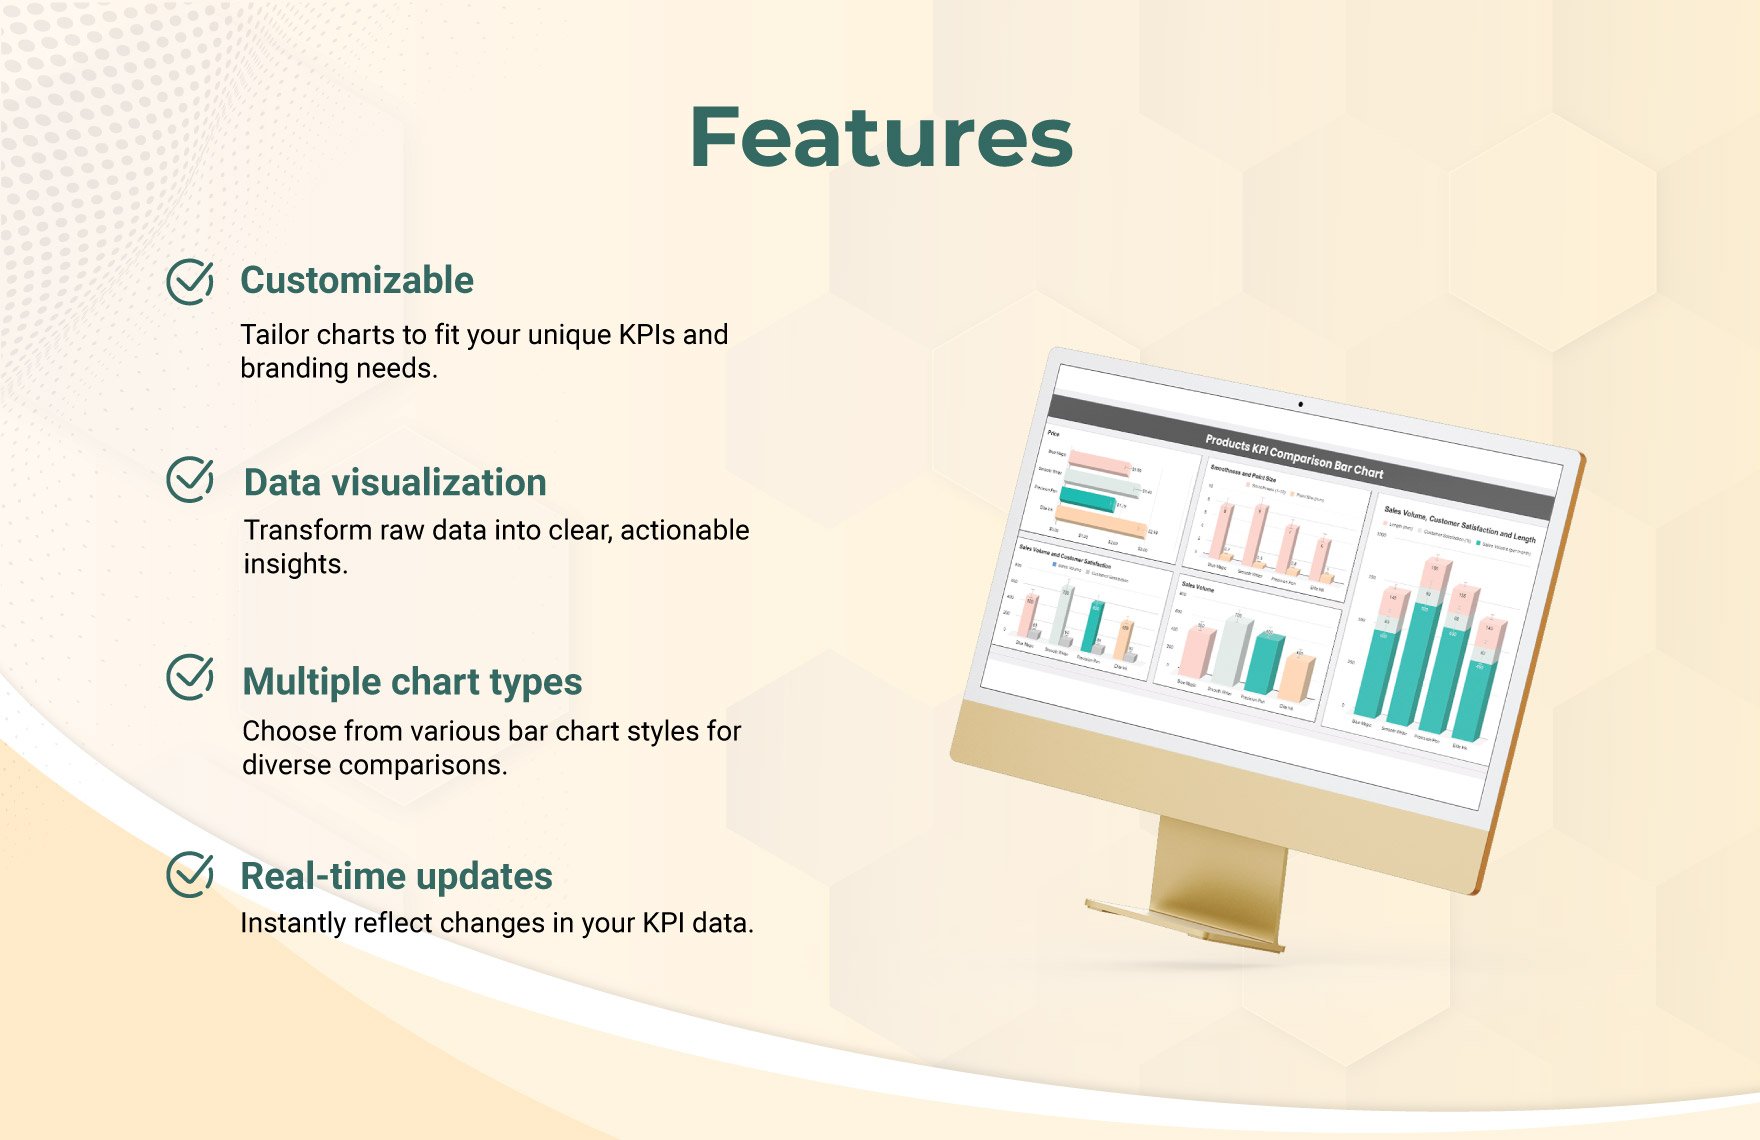 Products KPI Comparison Bar Chart Template